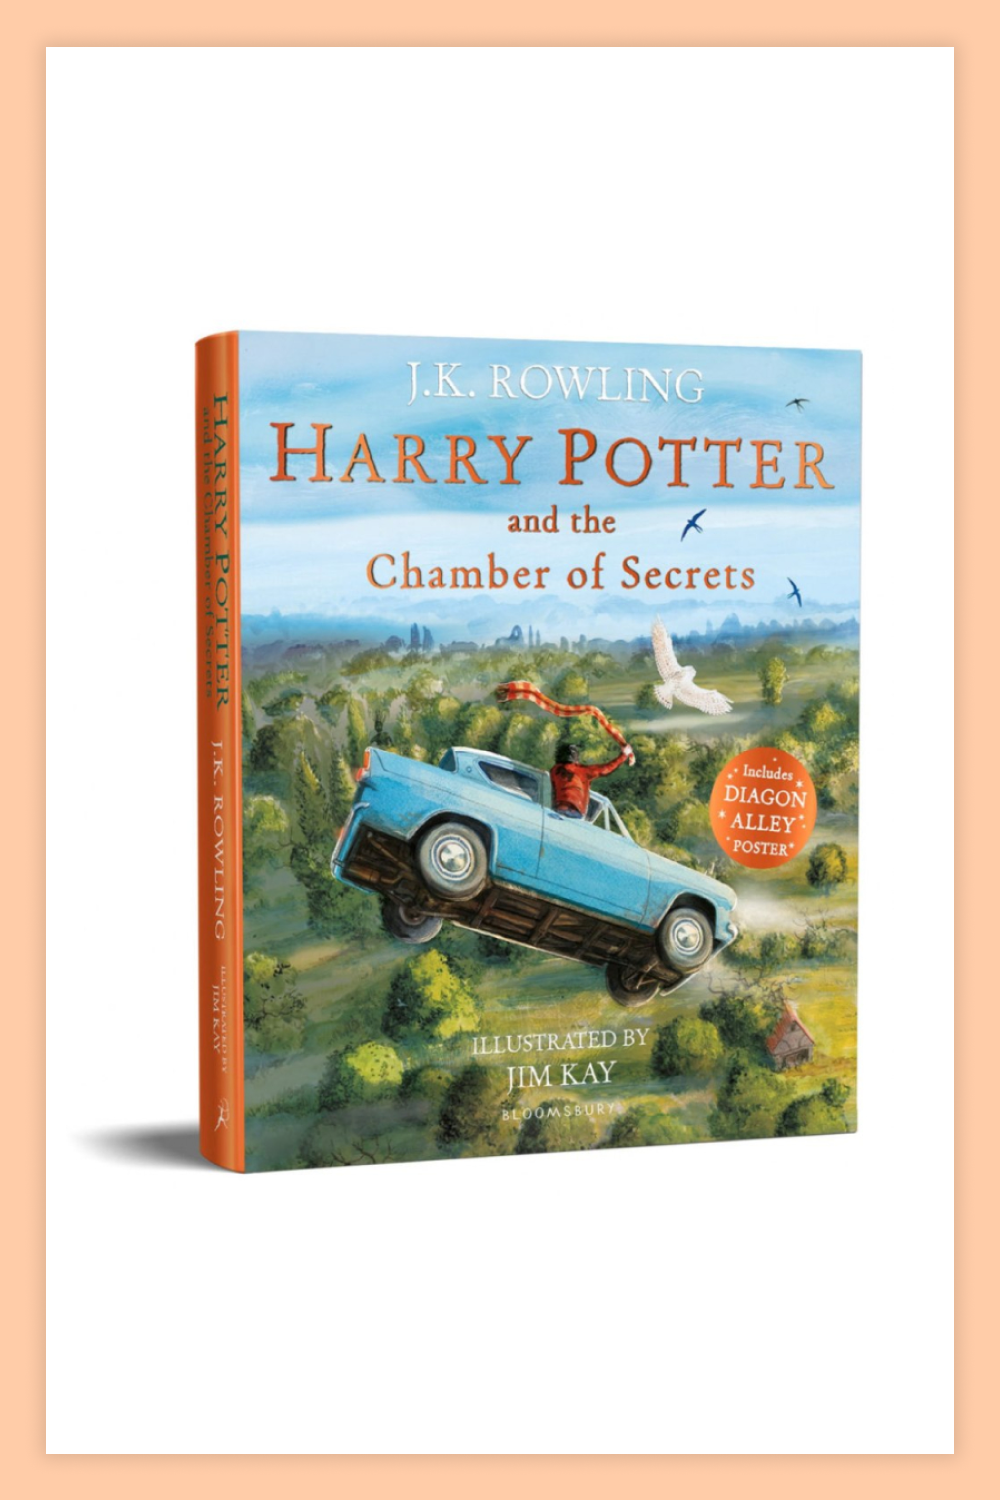 The book Harry Potter and the Chamber of Secrets.